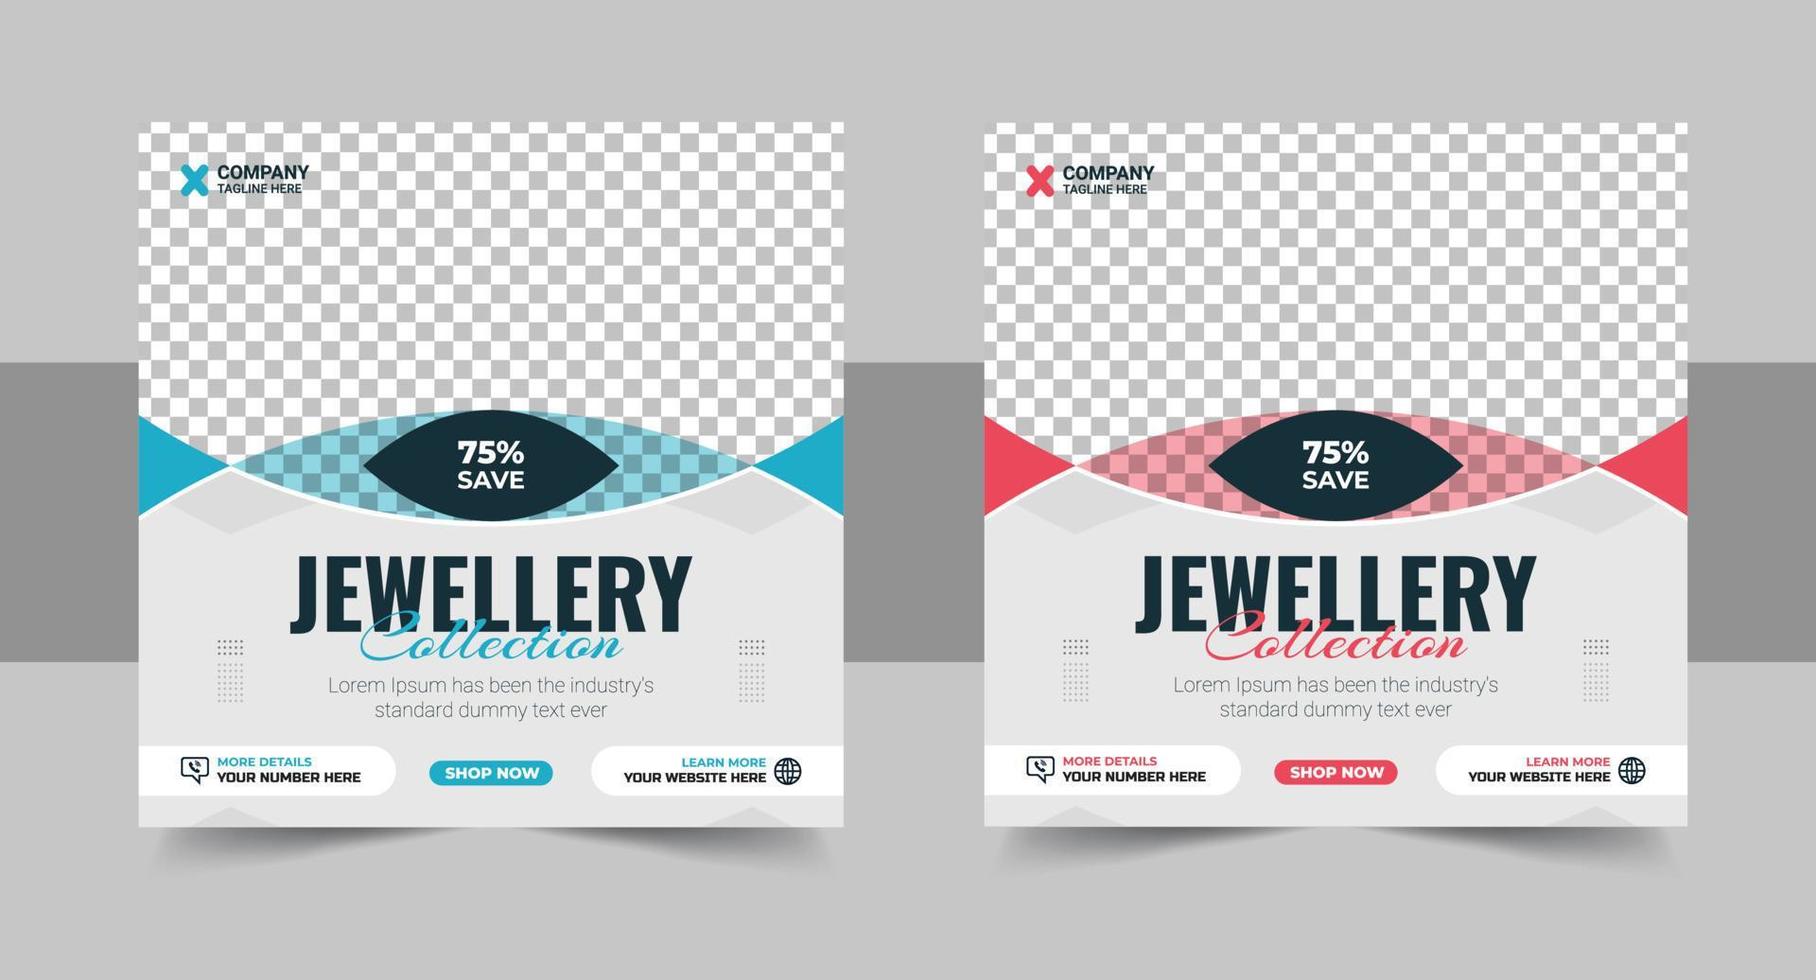 Jewellery collections social media post, Jewellery Collection Web Banner or Social Media Post Template Design layout vector